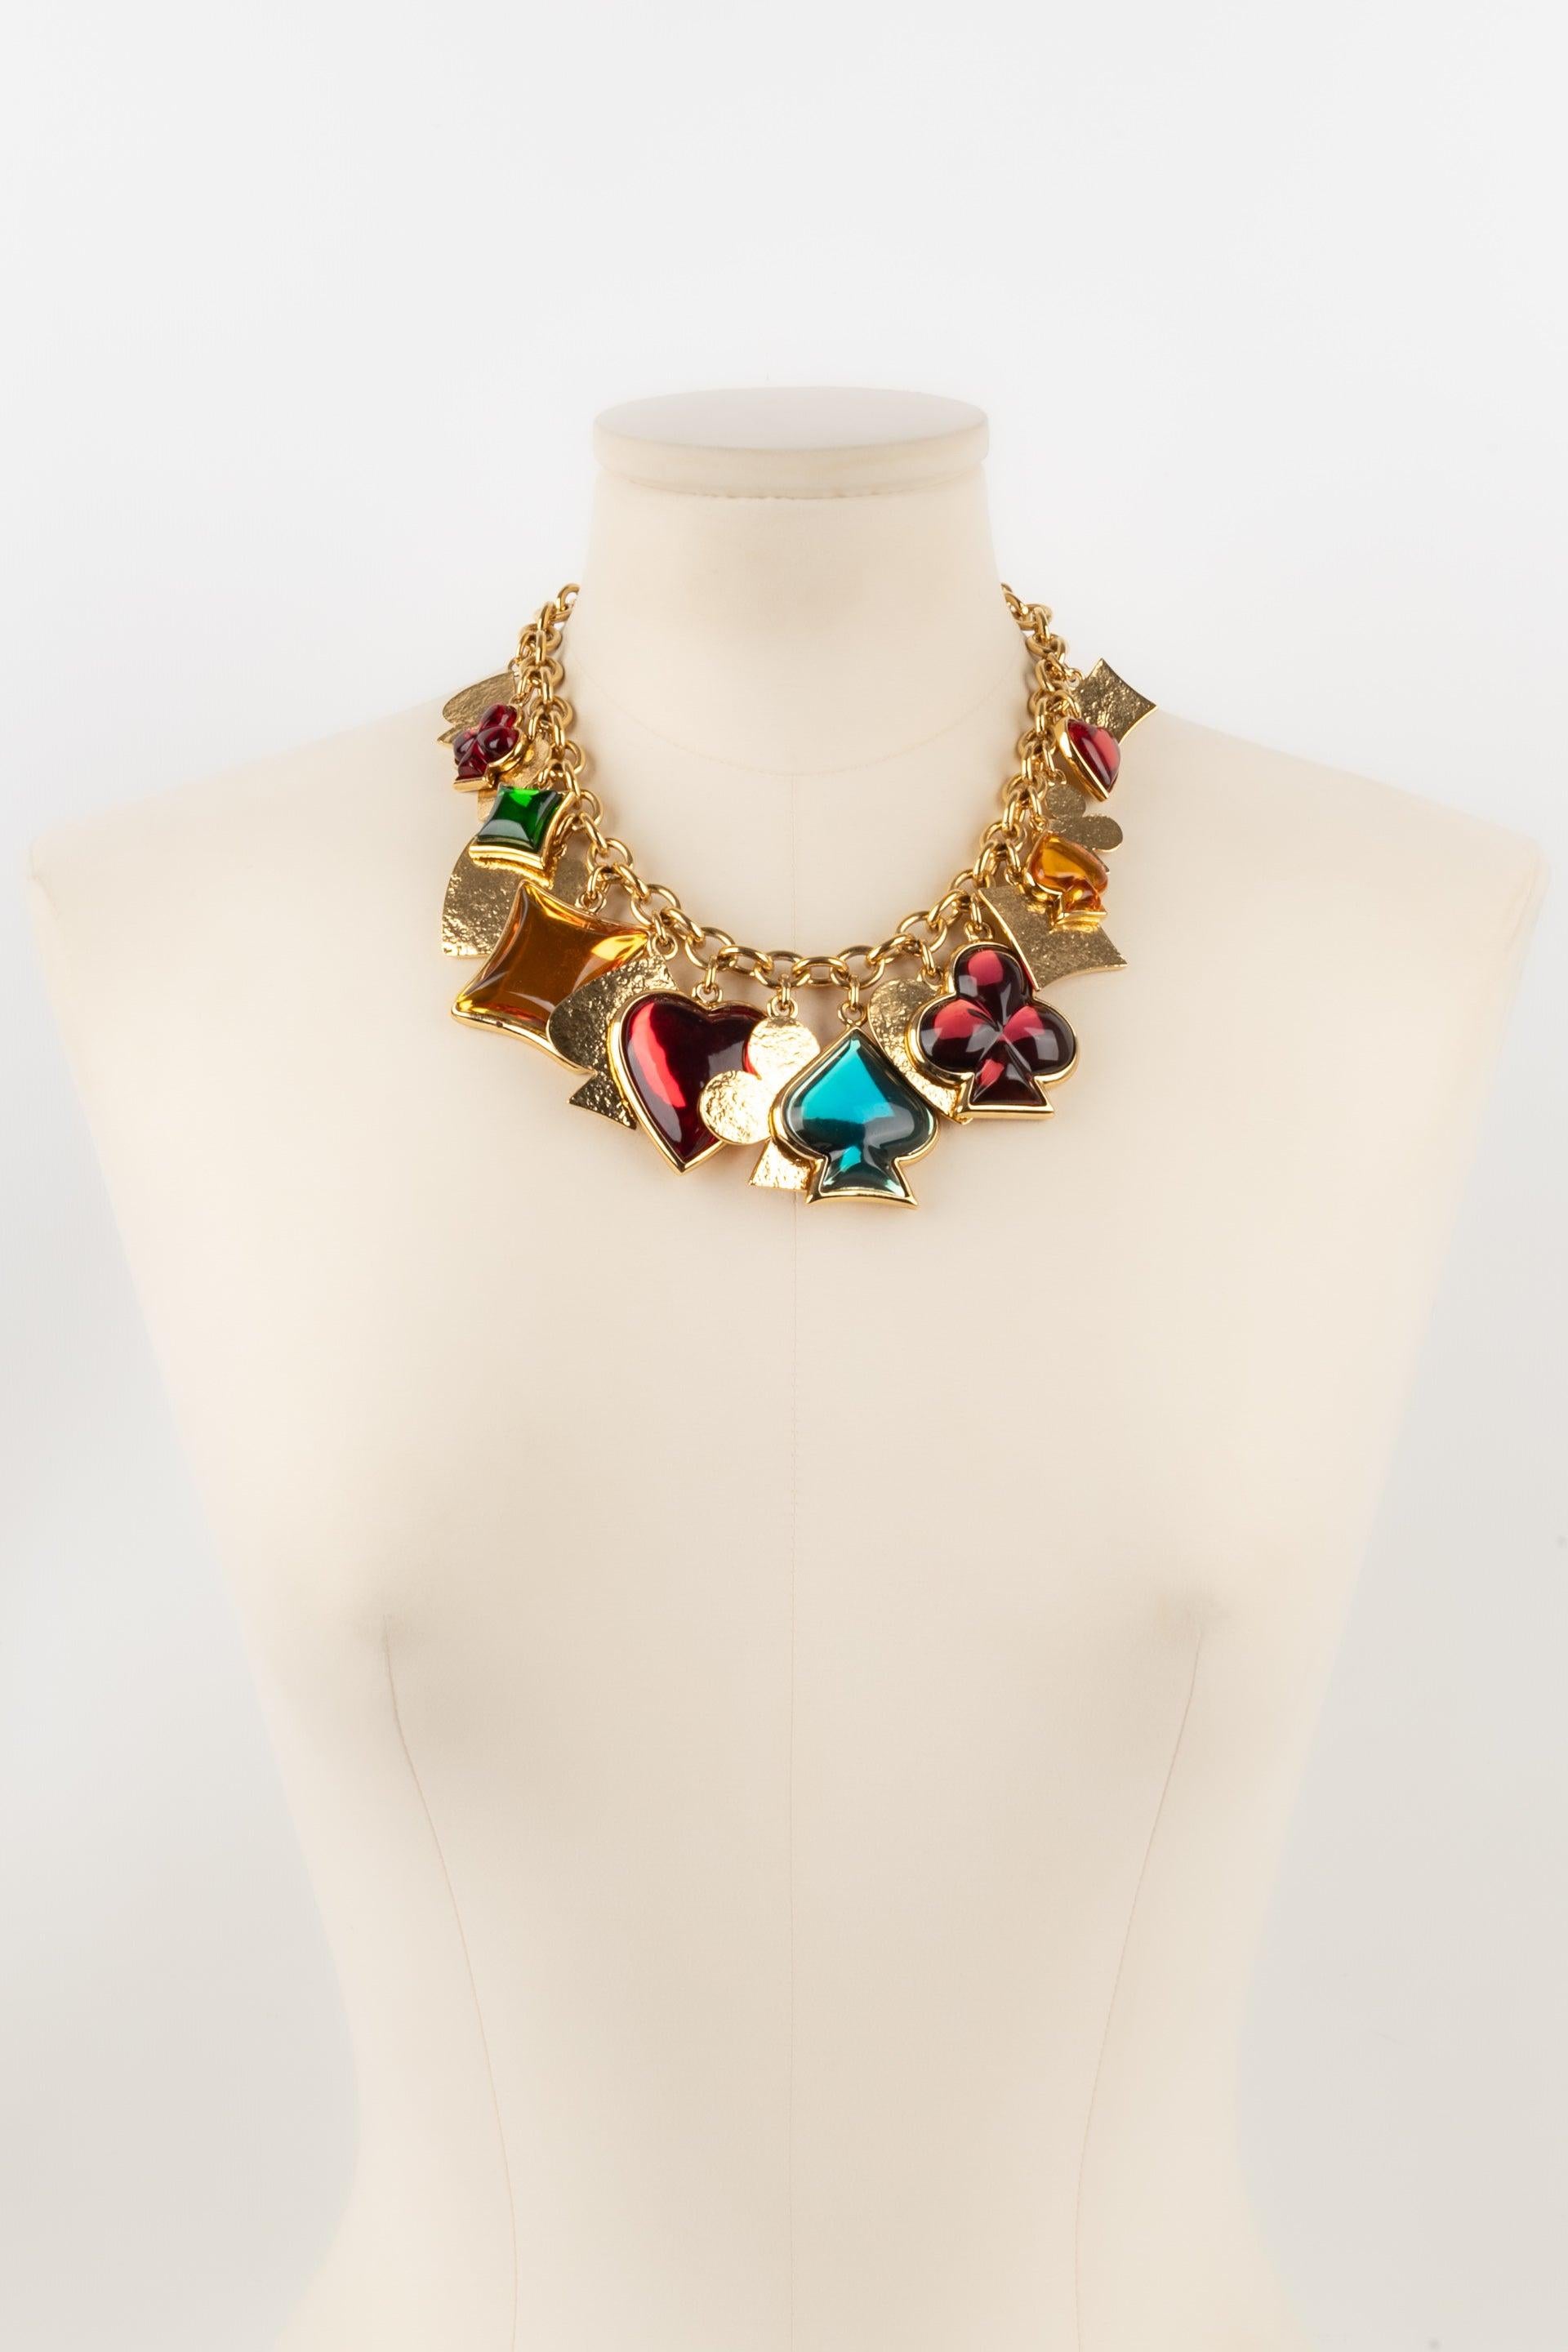 Yves Saint Laurent - (Made in France) Golden metal and resin charm necklace.

Additional information:
Condition: Very good condition
Dimensions: Length: 48 cm

Seller Reference: BC109